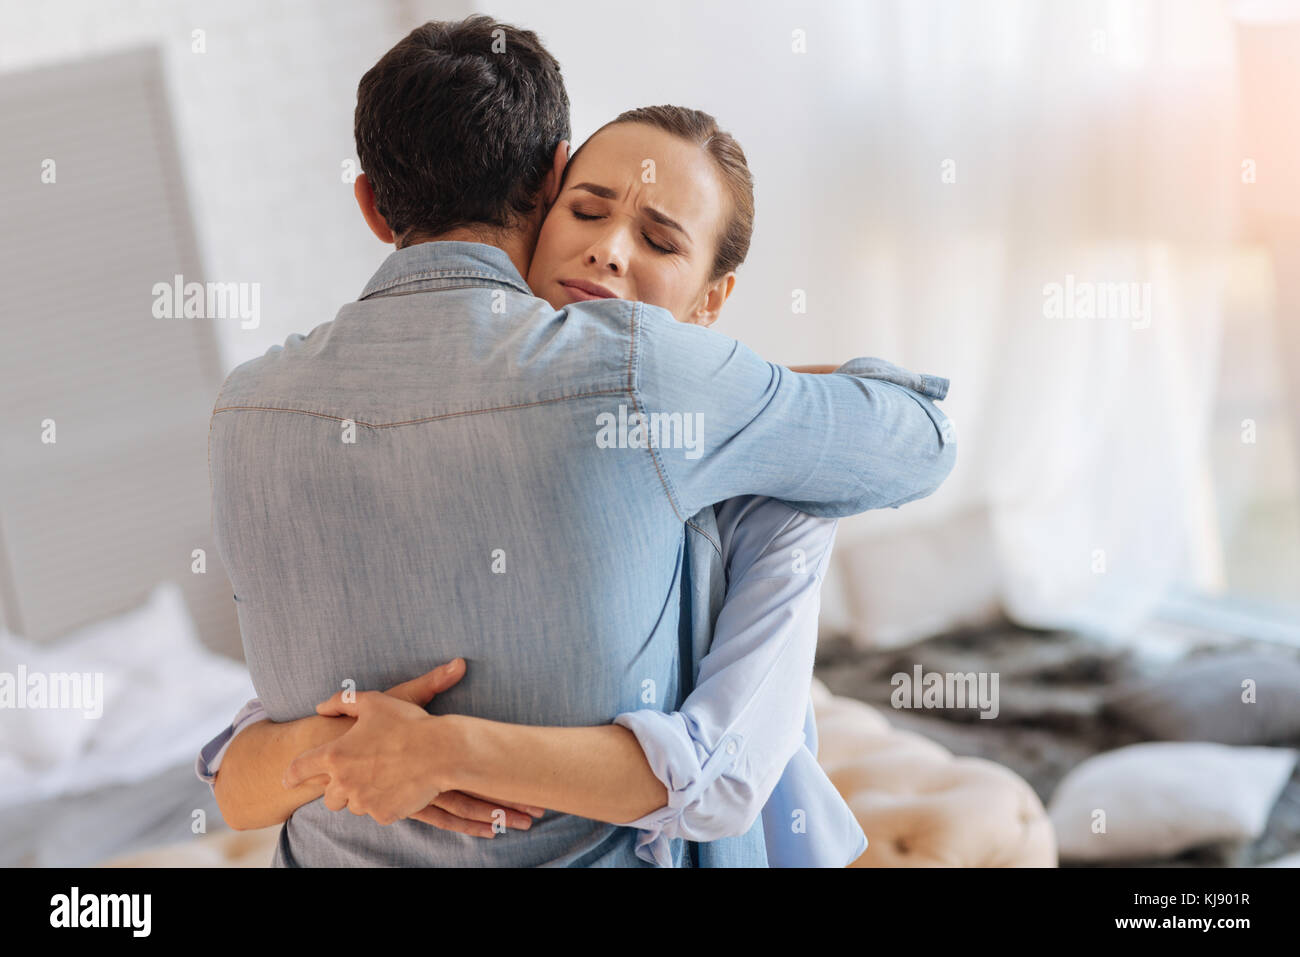 Exhausted dismissed woman hugging her loving husband Stock Photo